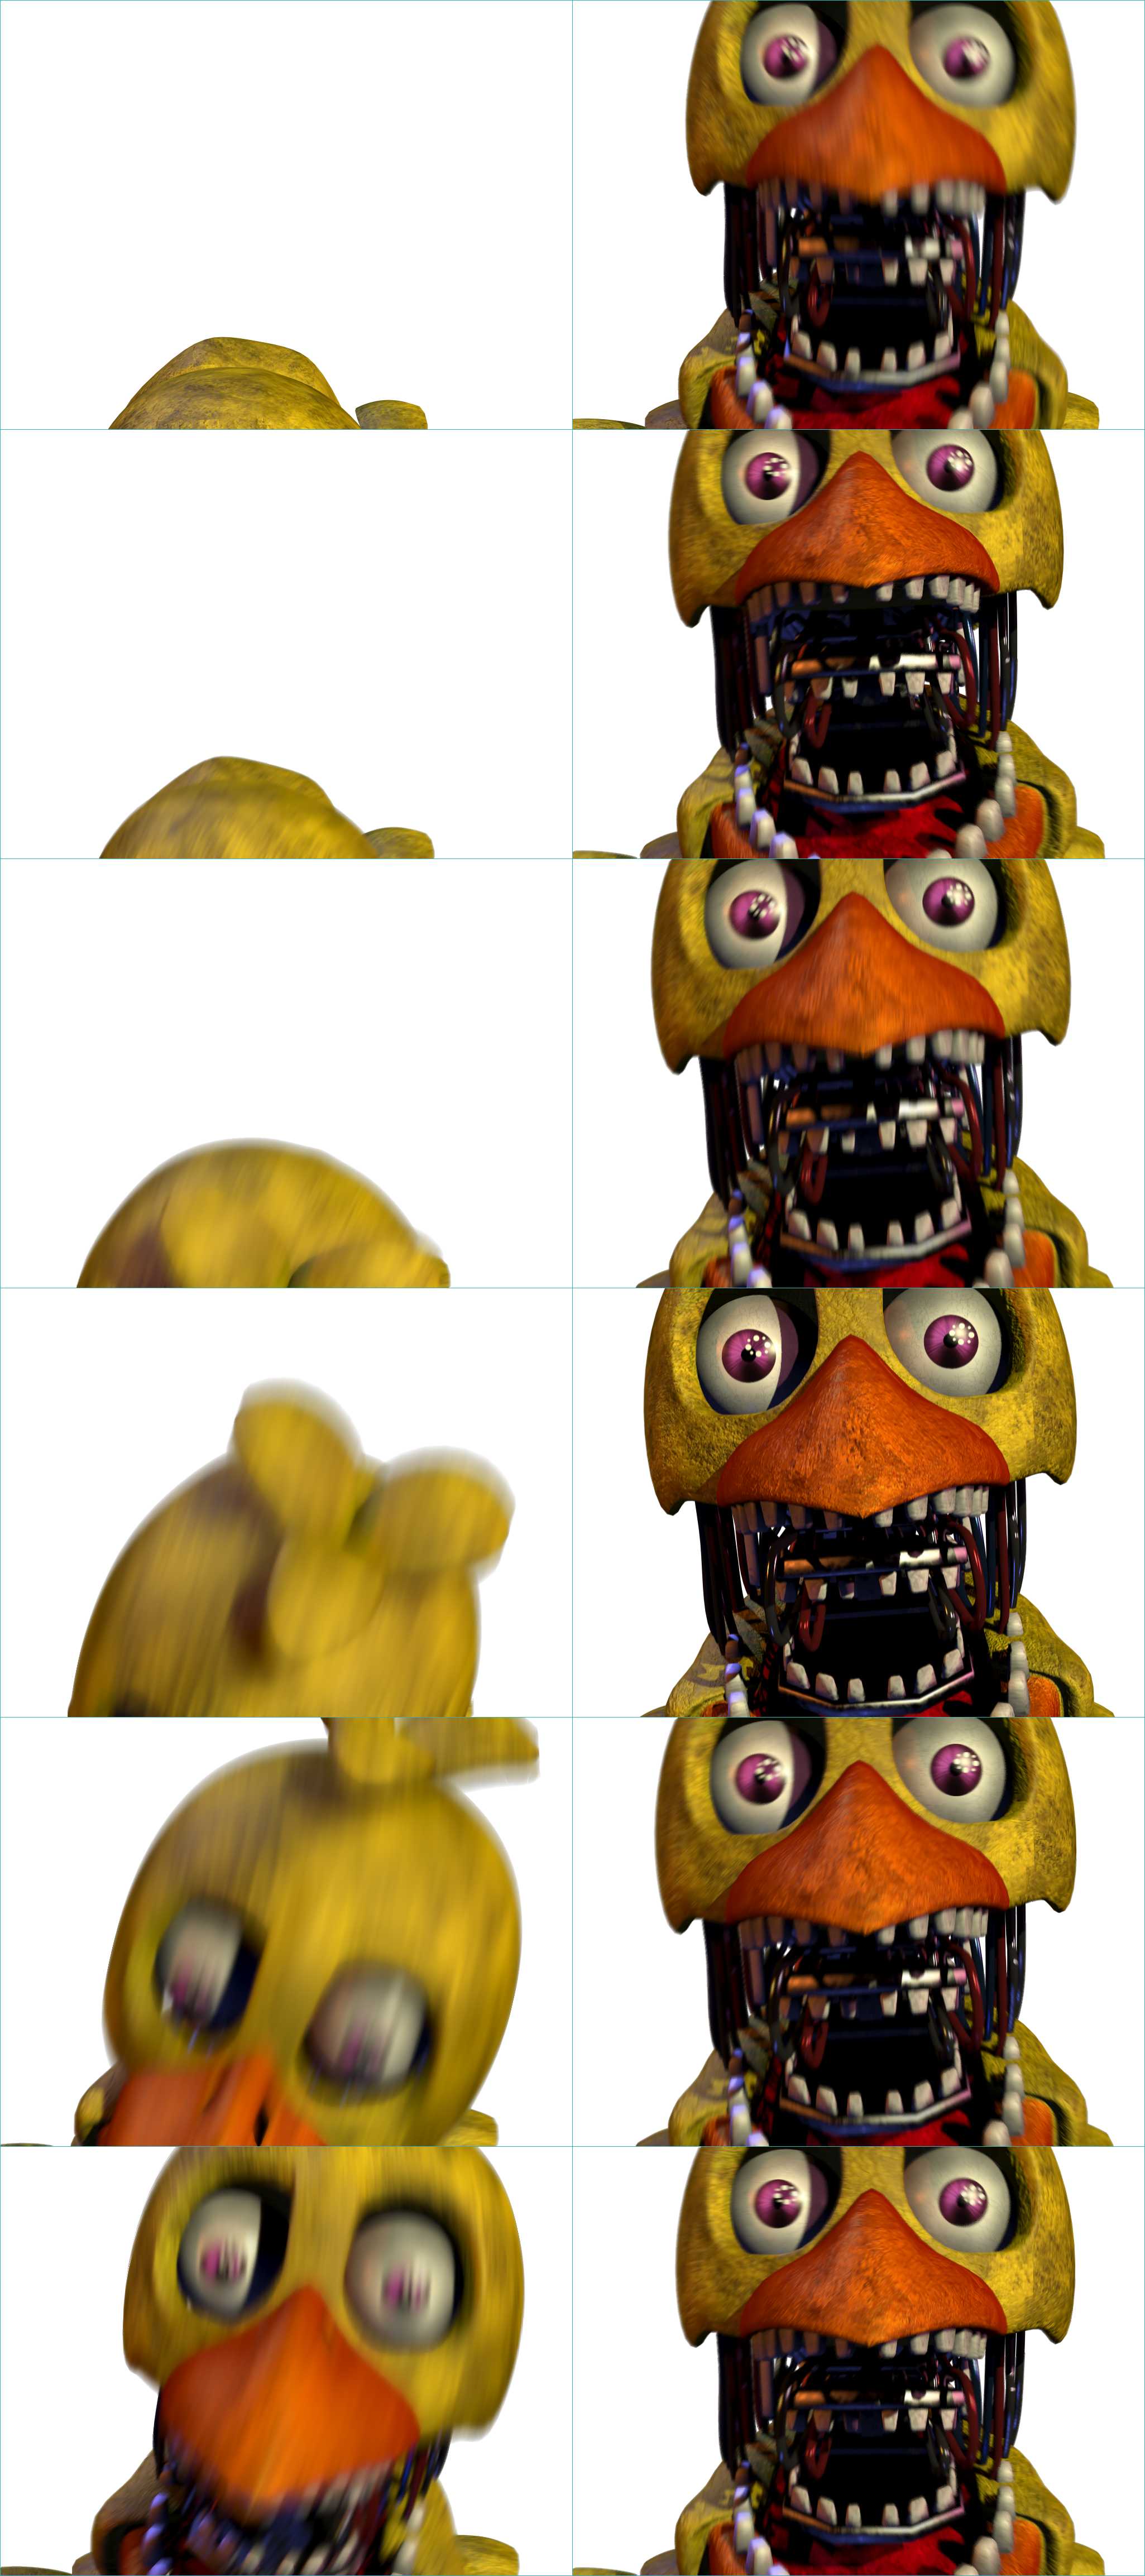 PC / Computer - Five Nights at Freddy's 2 - Other Animatronics